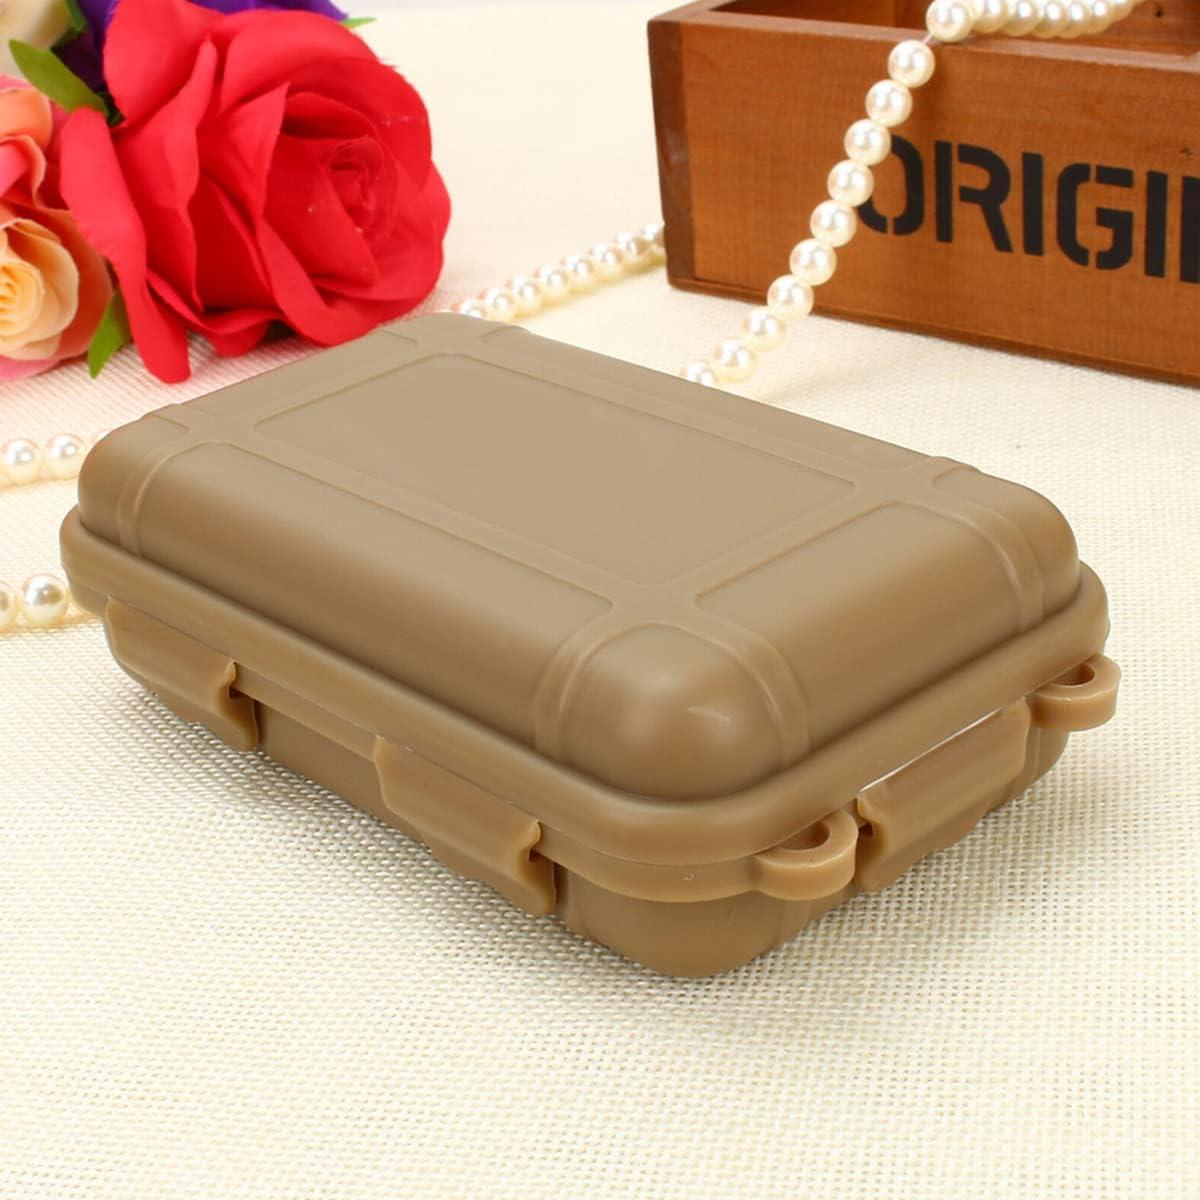 New L/S Size Outdoor Plastic Waterproof Airtight Survival Case Container  Camping Outdoor Travel Storage Box